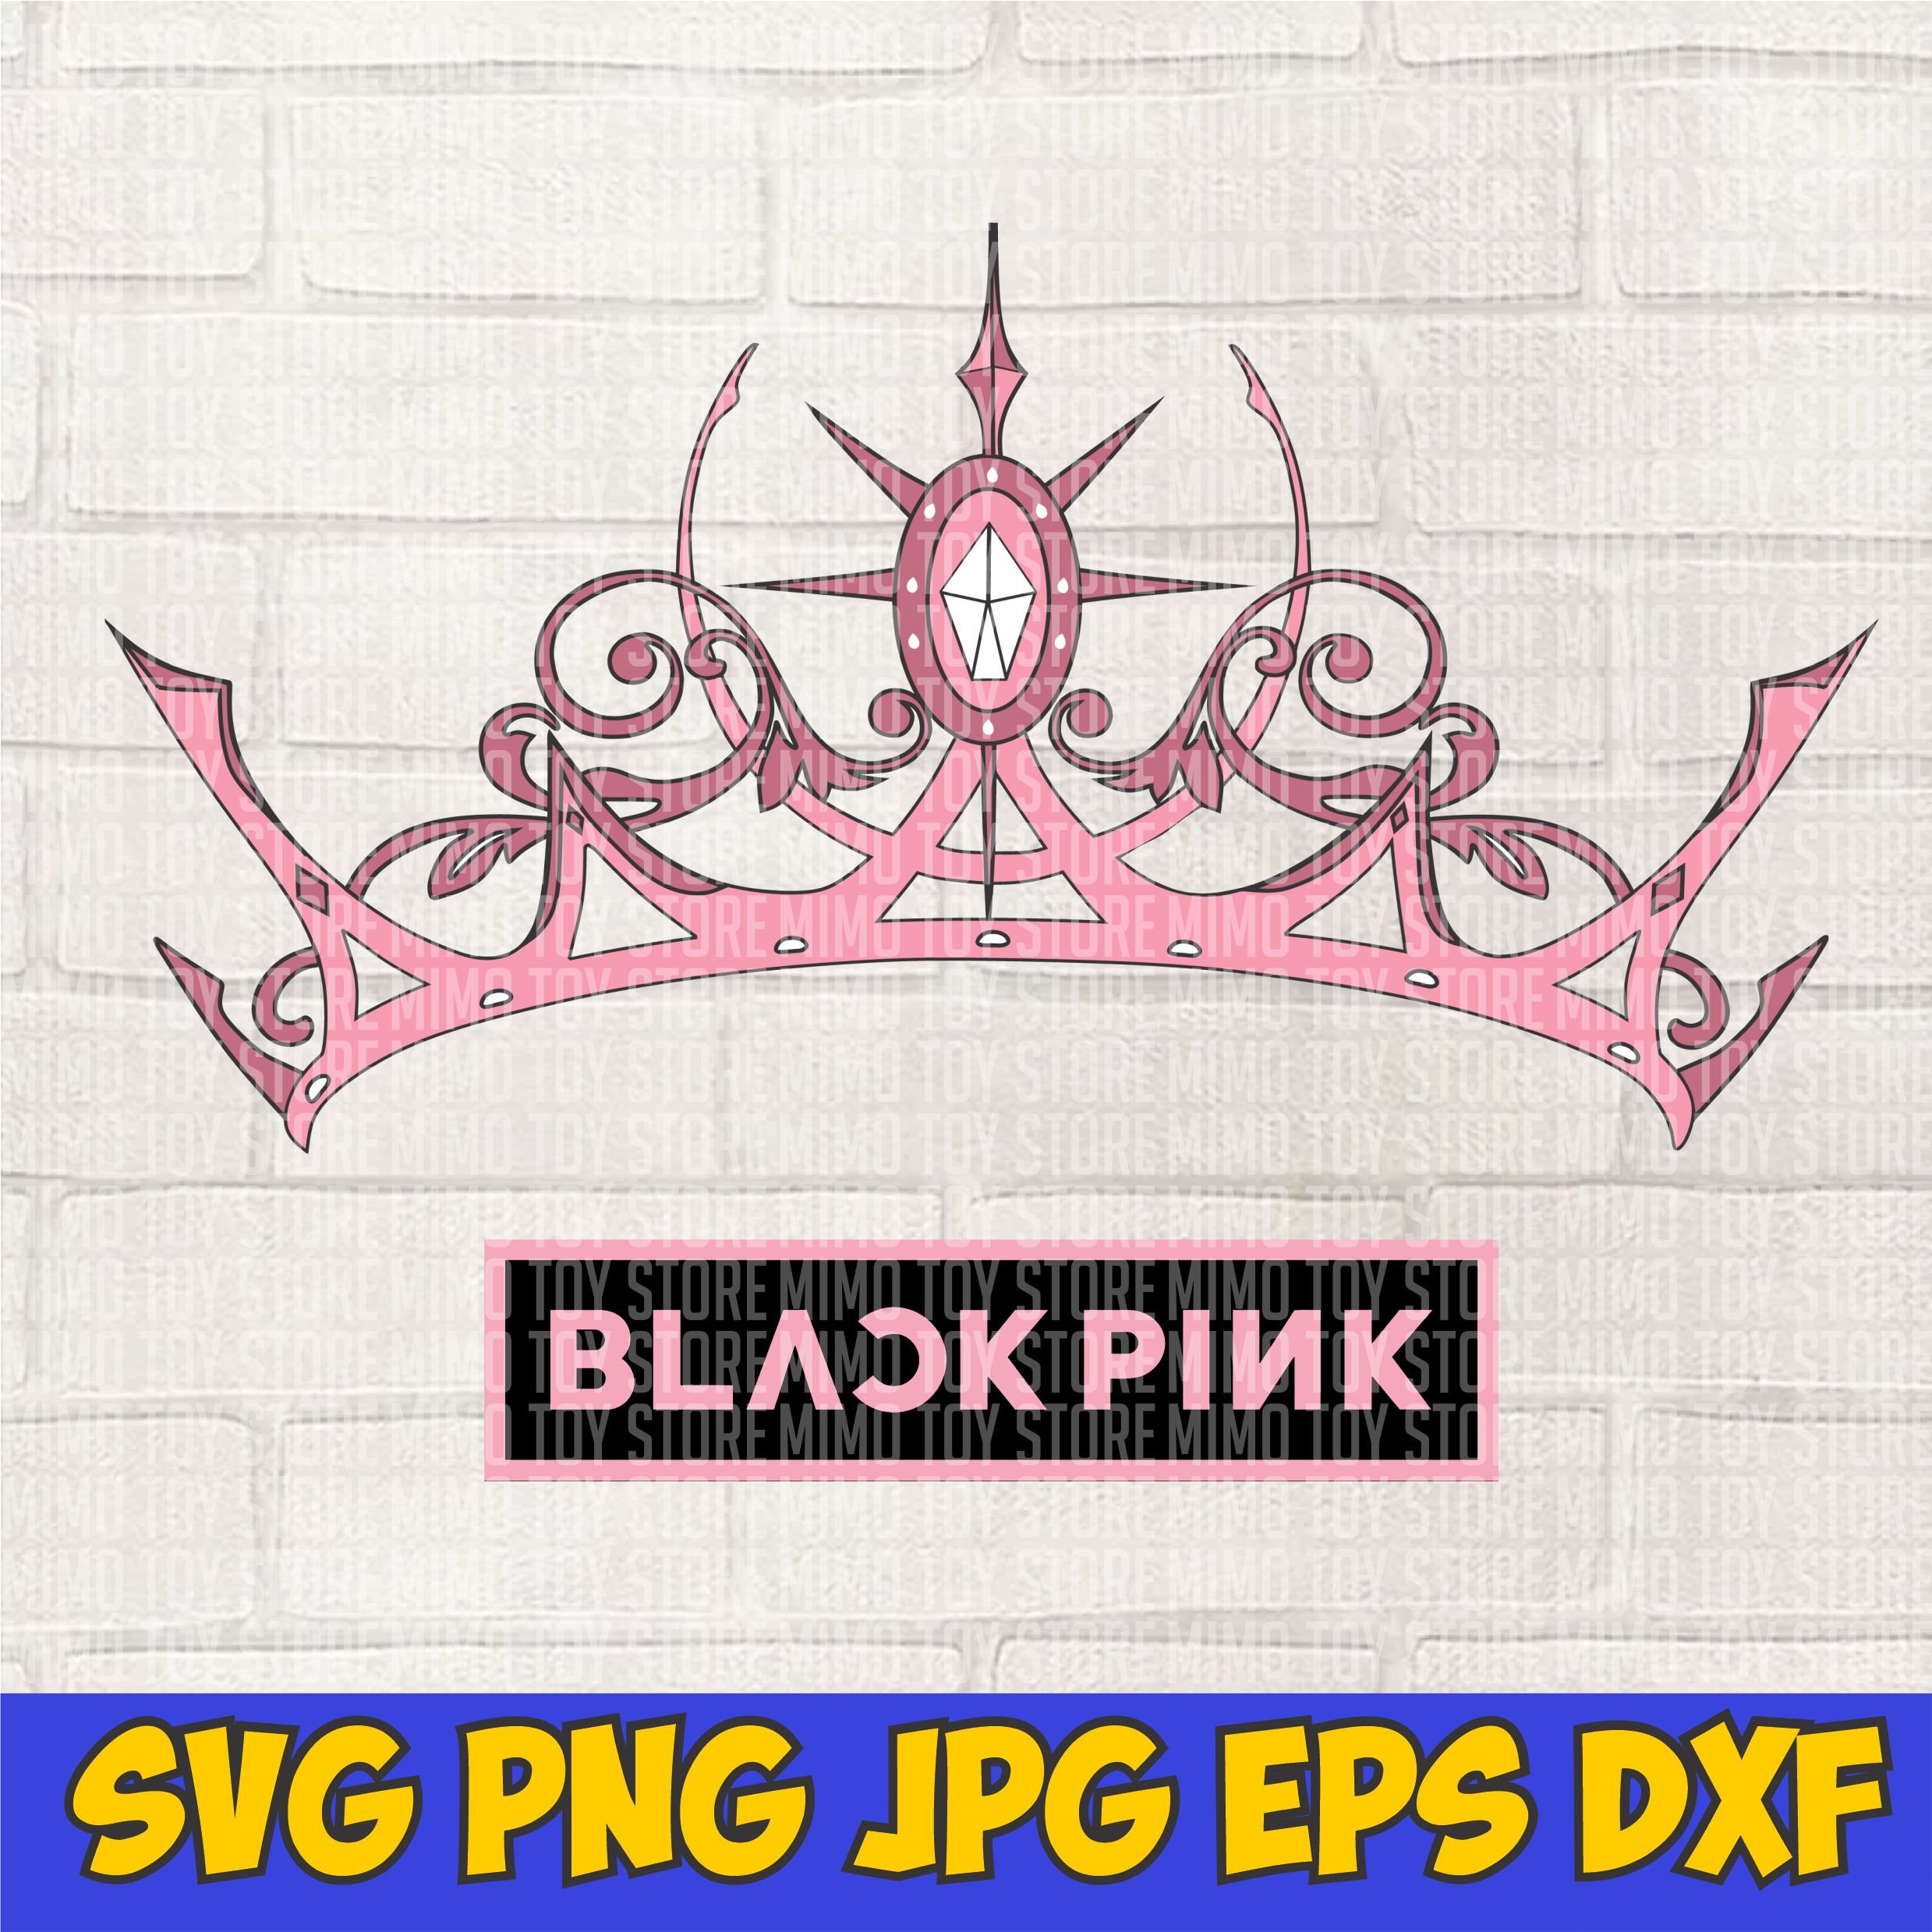 Top 99 blackpink logo crown most viewed and downloaded